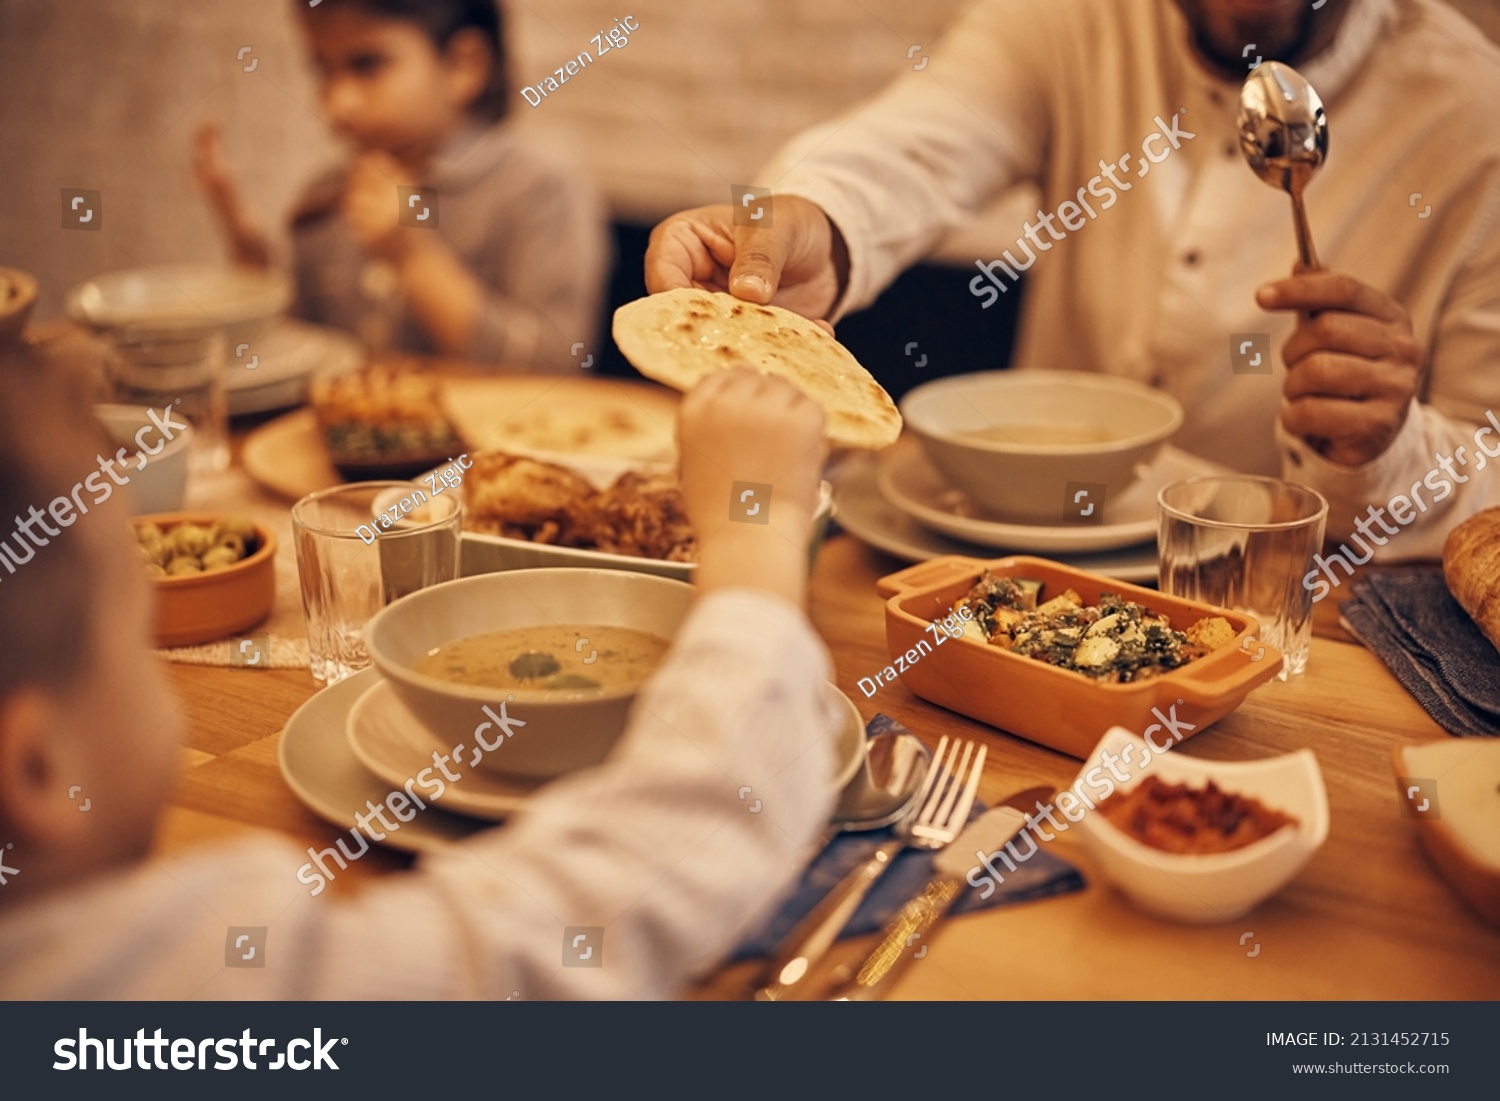 Close-up of Muslim father passing his son Lafah Bread during dinner at dining table on Ramadan. #2131452715